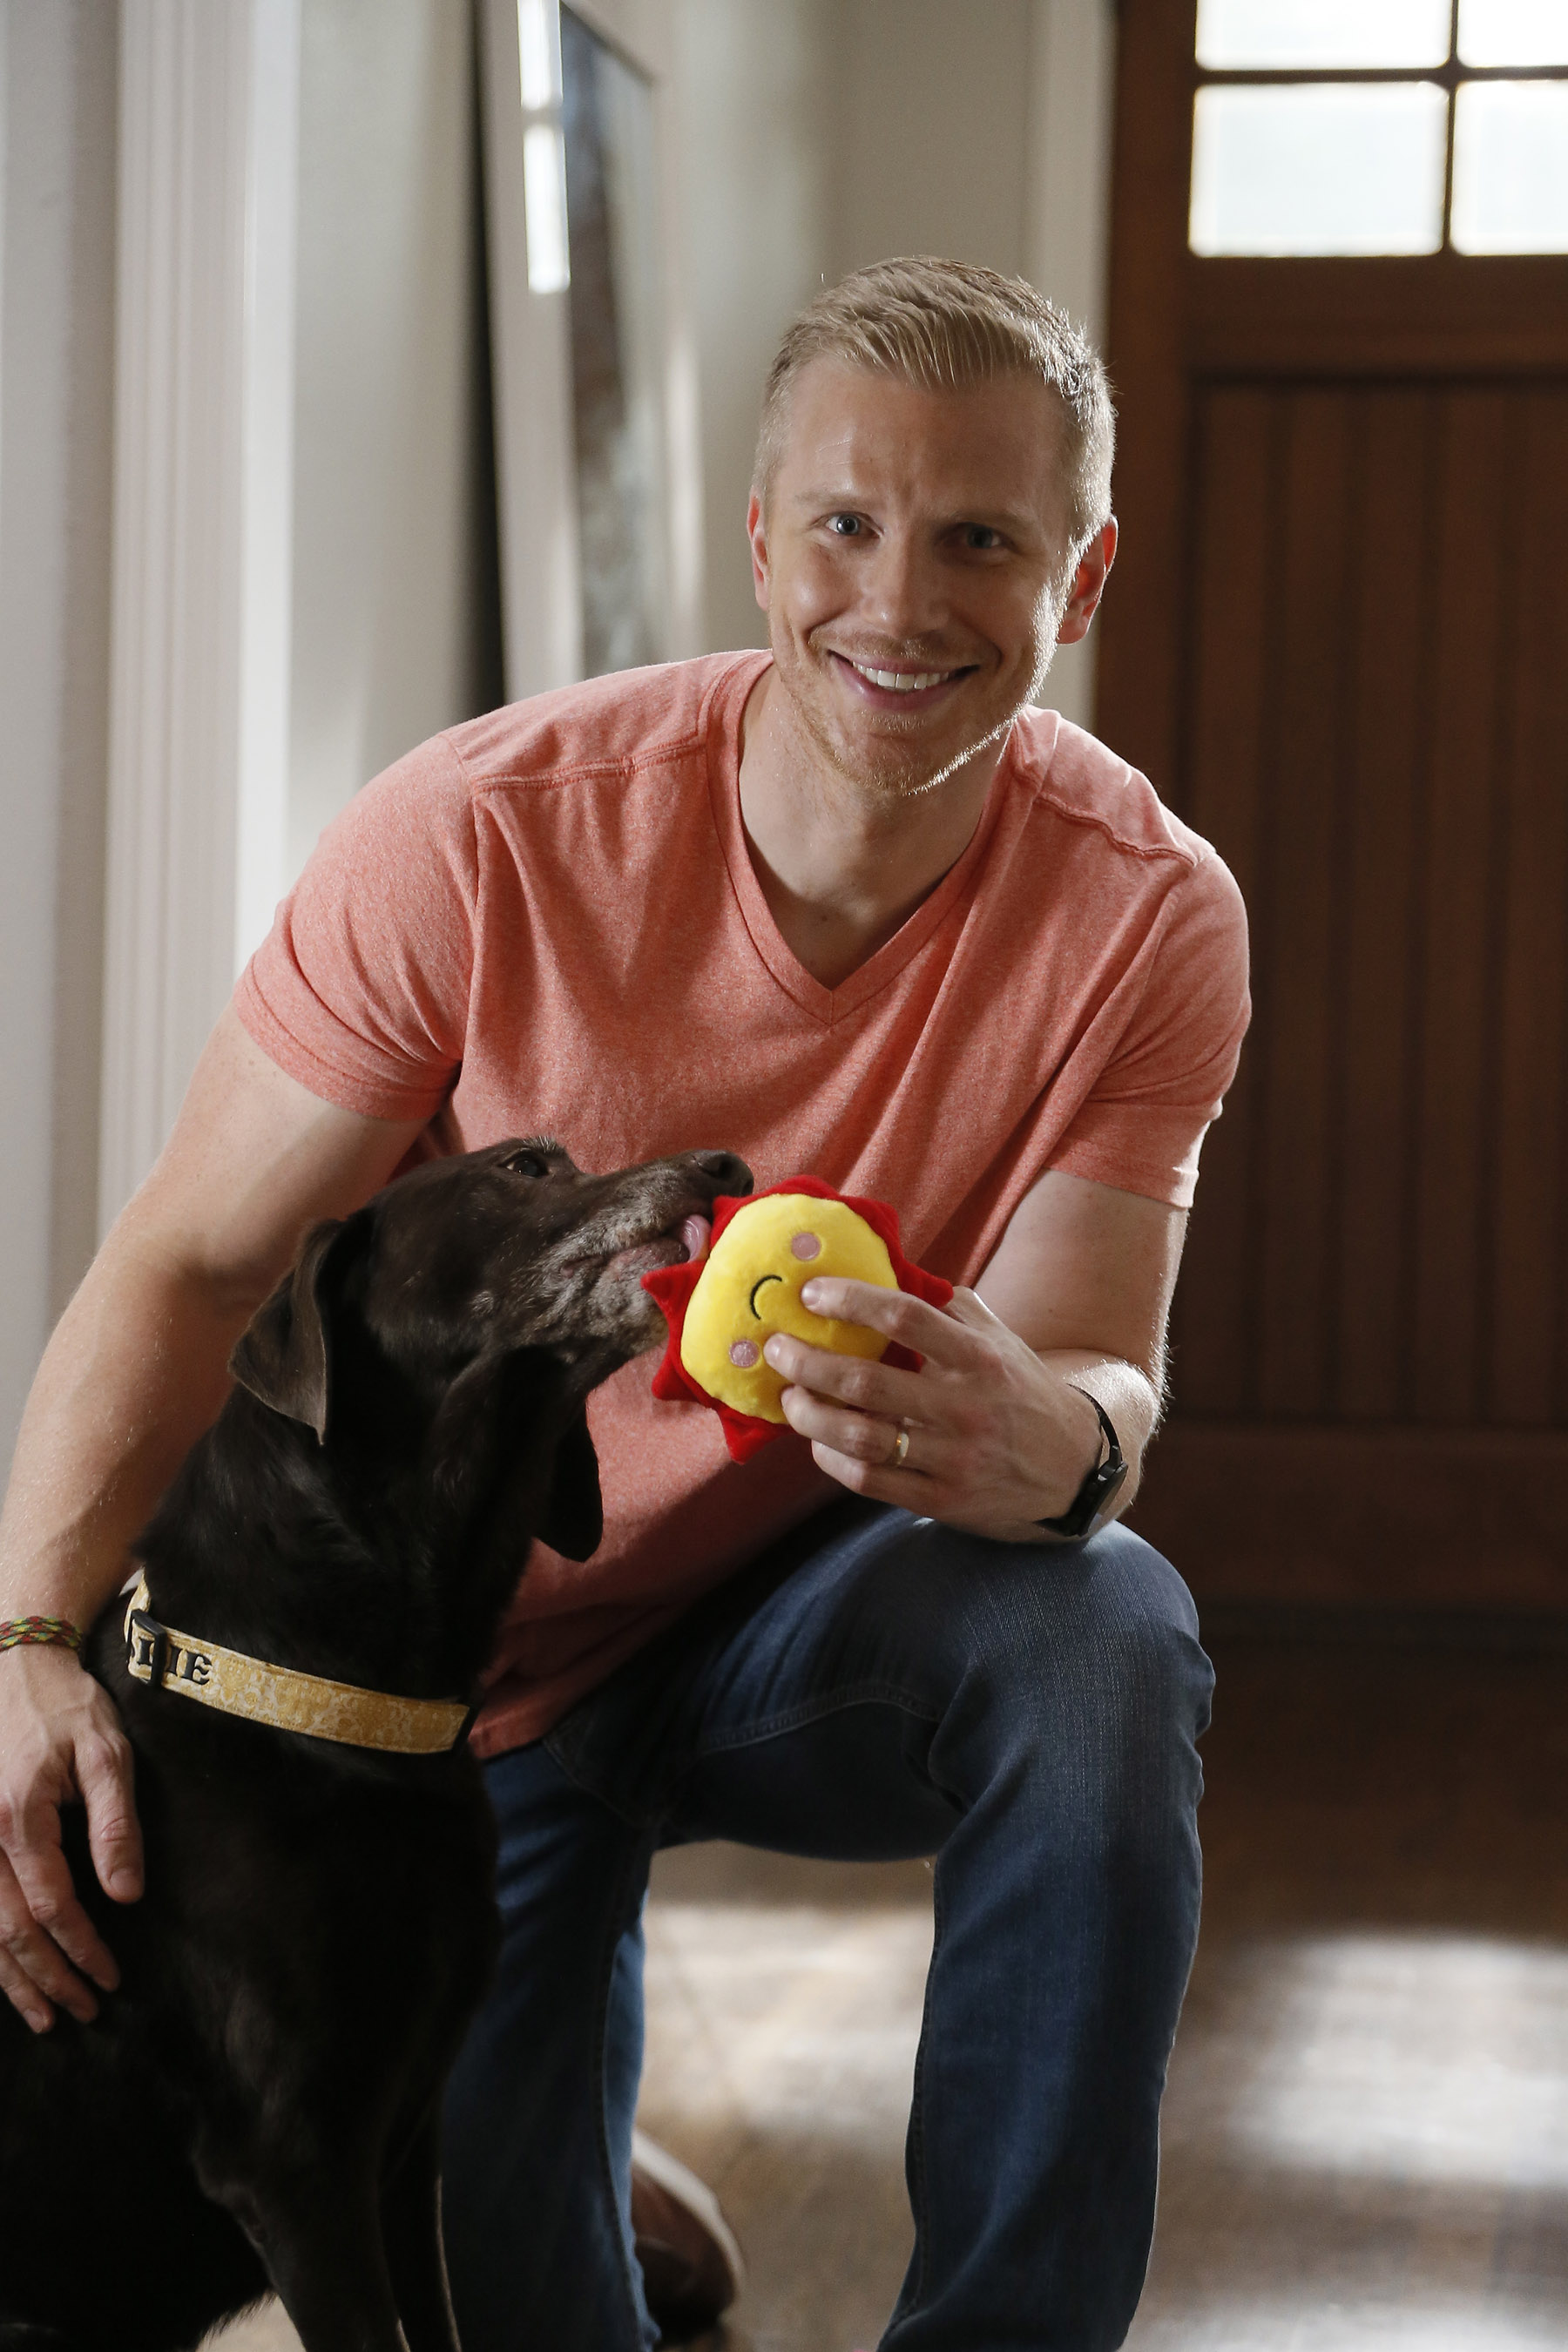 TV personality and Hurricane Harvey responder Sean Lowe plays with his beloved dog, Ellie, and her favorite toy while filming a public service announcement (PSA) on pet disaster preparedness with the Banfield Foundation at his home in Dallas, Texas. The PSA debuted nationally on Wednesday, June 6, 2018 and educates pet owners on the importance of including pets in disaster planning. (Photo credit: Brandon Wade/AP Images for the Banfield Foundation)